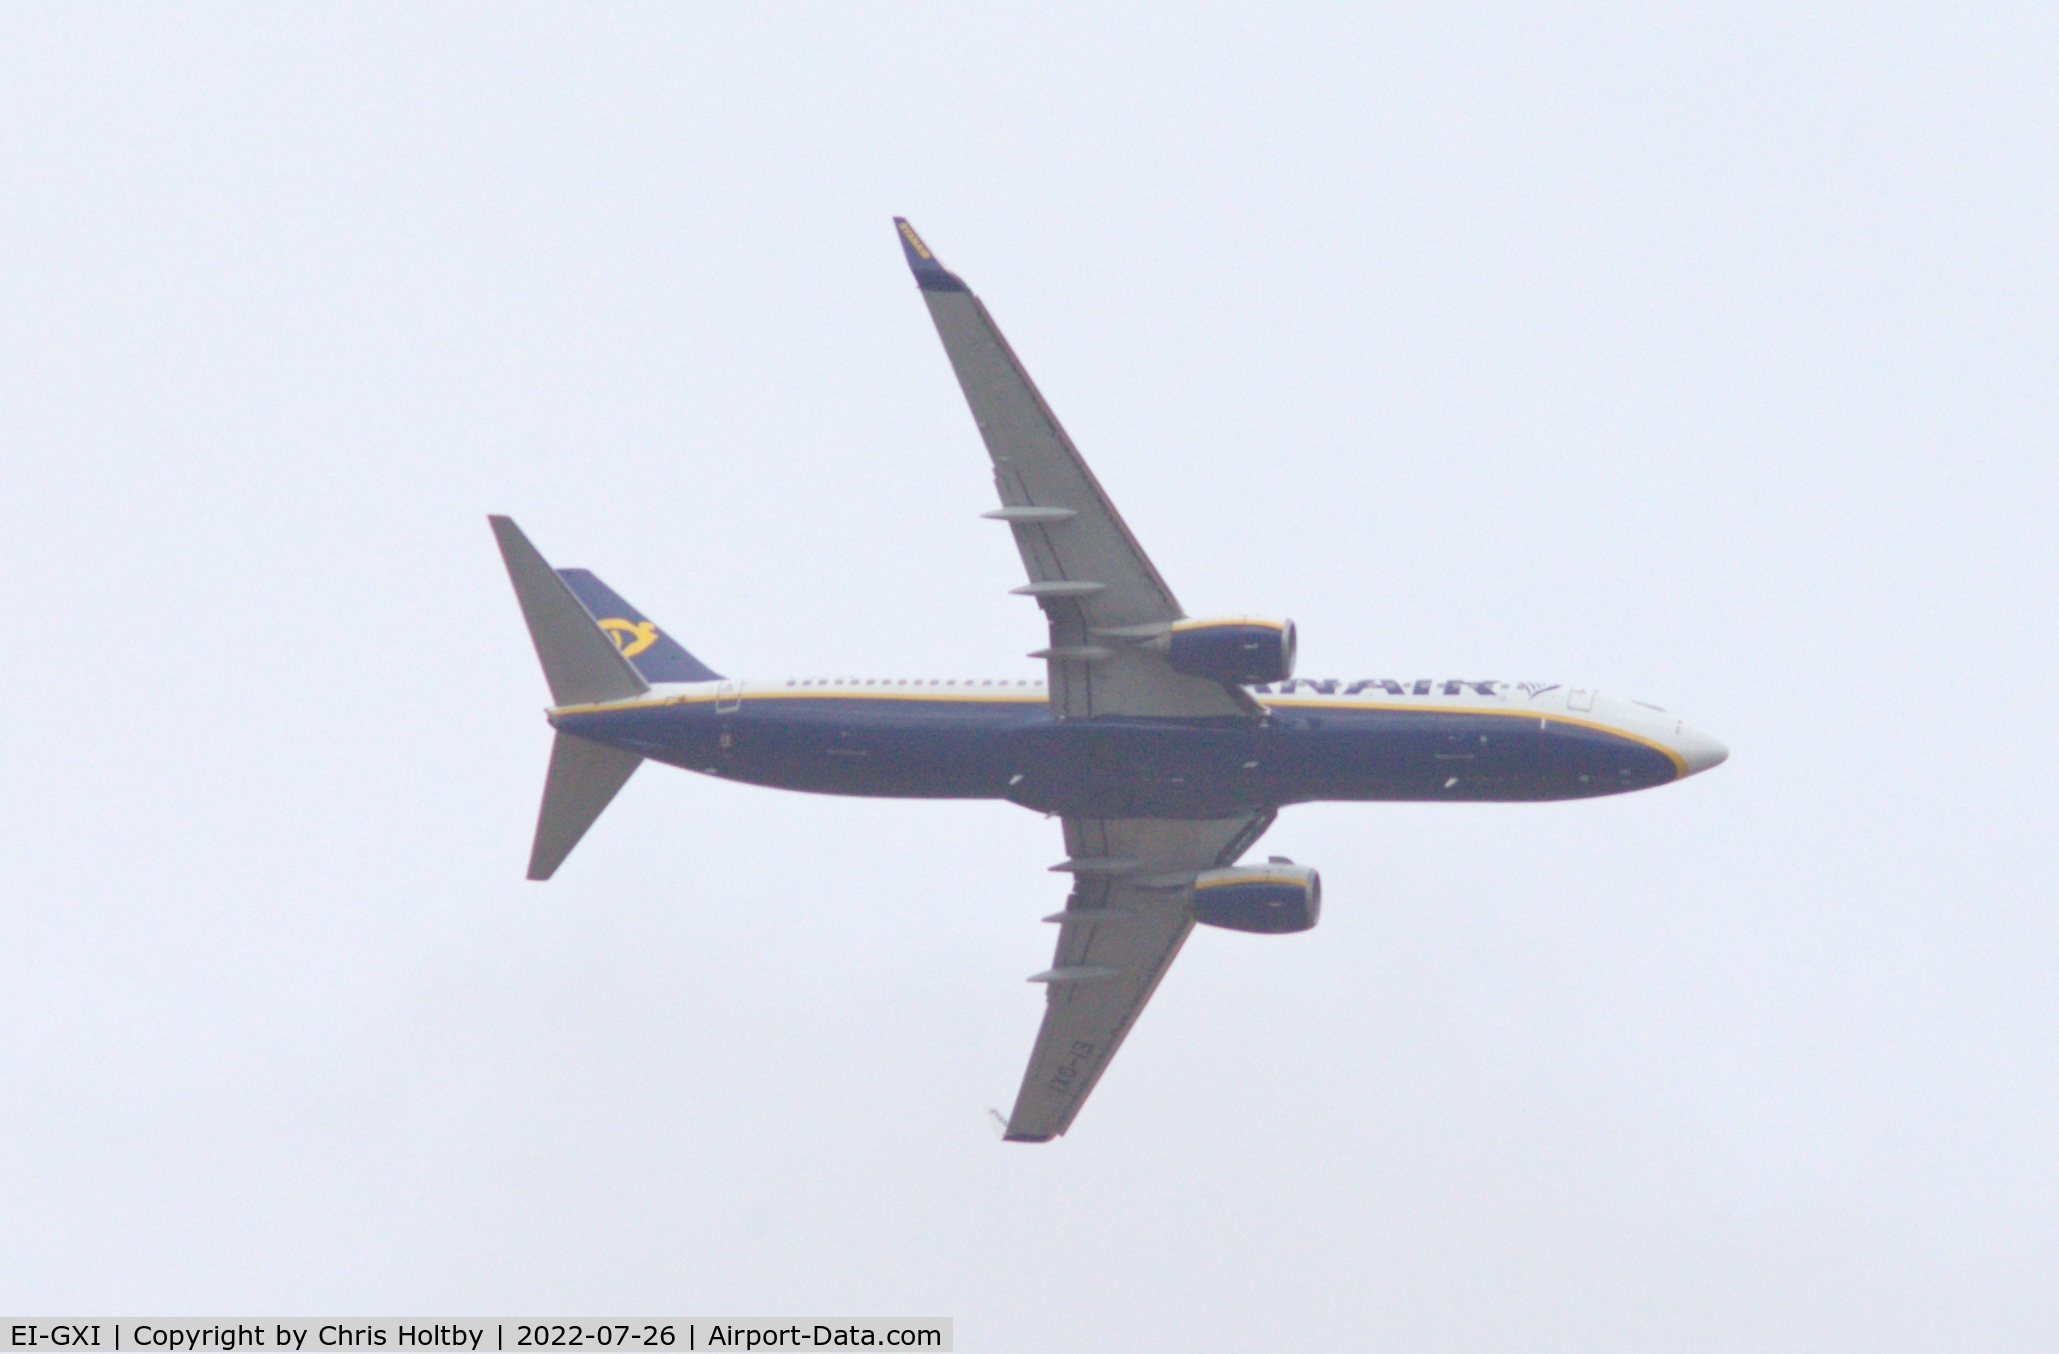 EI-GXI, 2018 Boeing 737-800 C/N 44851, Over Ware, Herts on its way into Stansted Airport, Essex